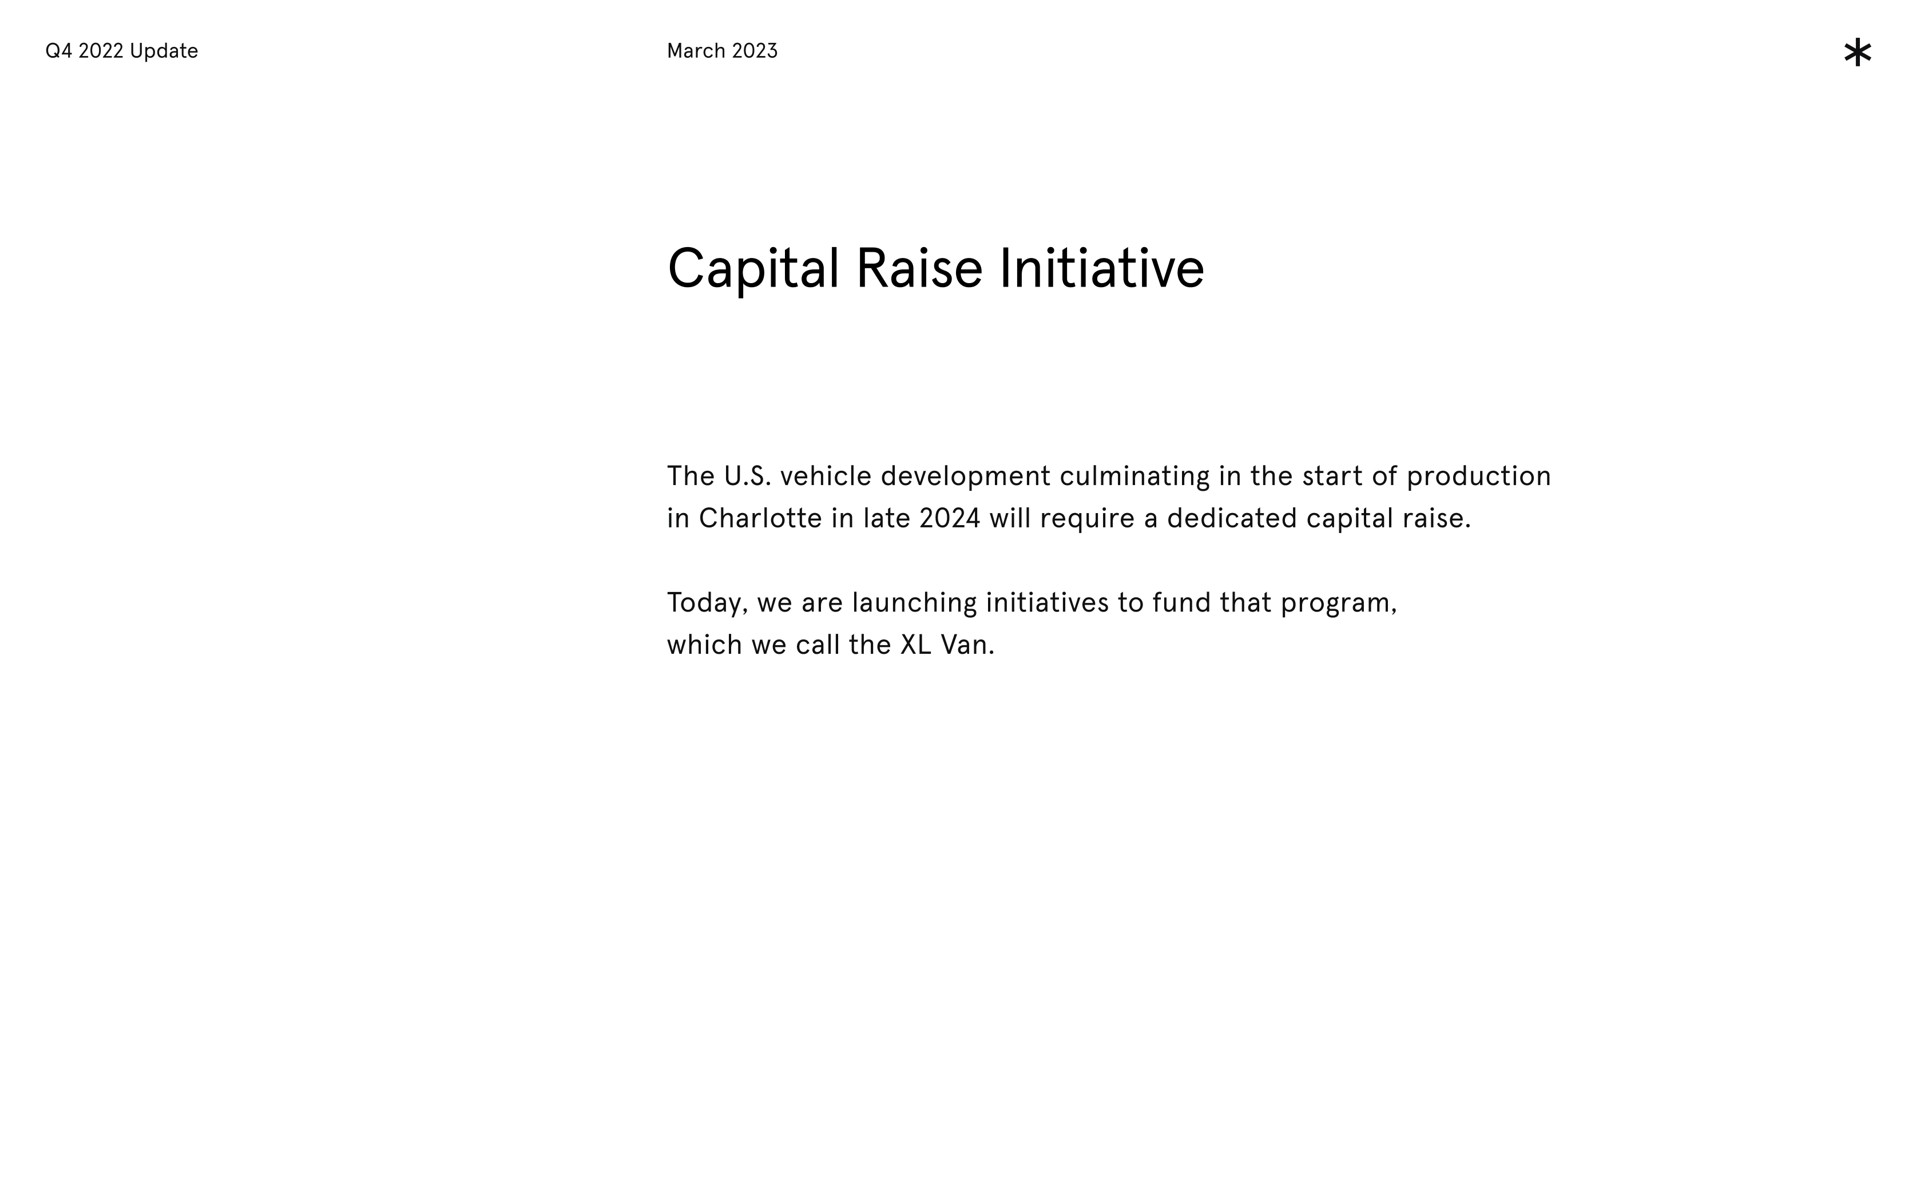 capital raise initiative the vehicle development culminating in the start of production in in late will require a dedicated capital raise we are launching initiatives to fund that program which we call the van today | Arrival